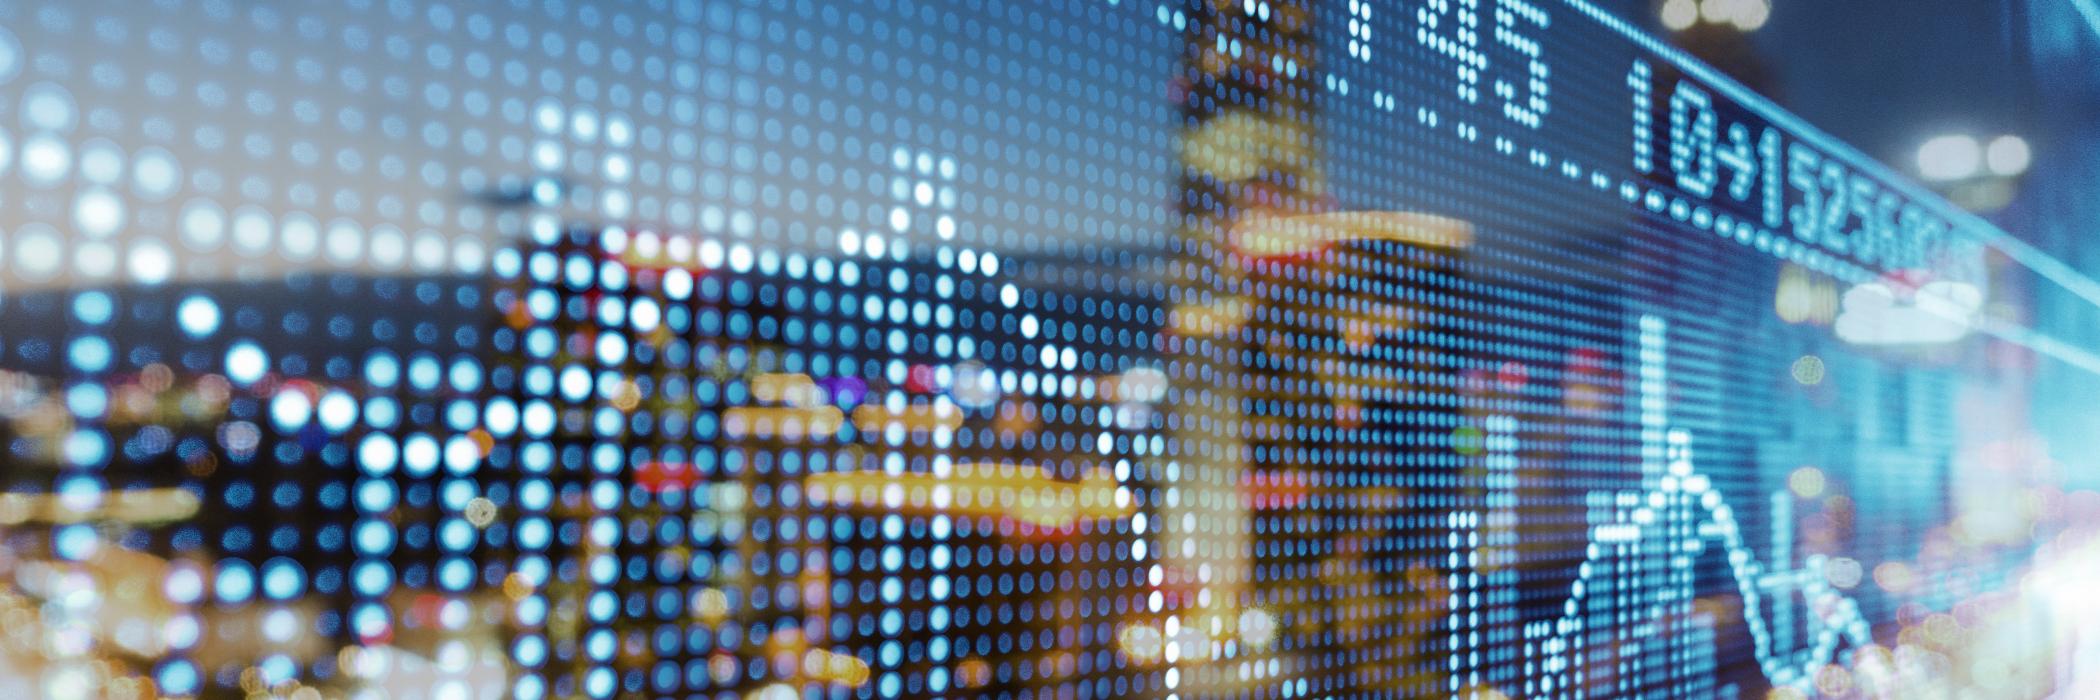 Forecasting systemic risks in financial markets, for example, is increasingly difficult in our digitalised, globalised and complex world. Research conducted in this field at the IASS will seek to develop an early warning system.